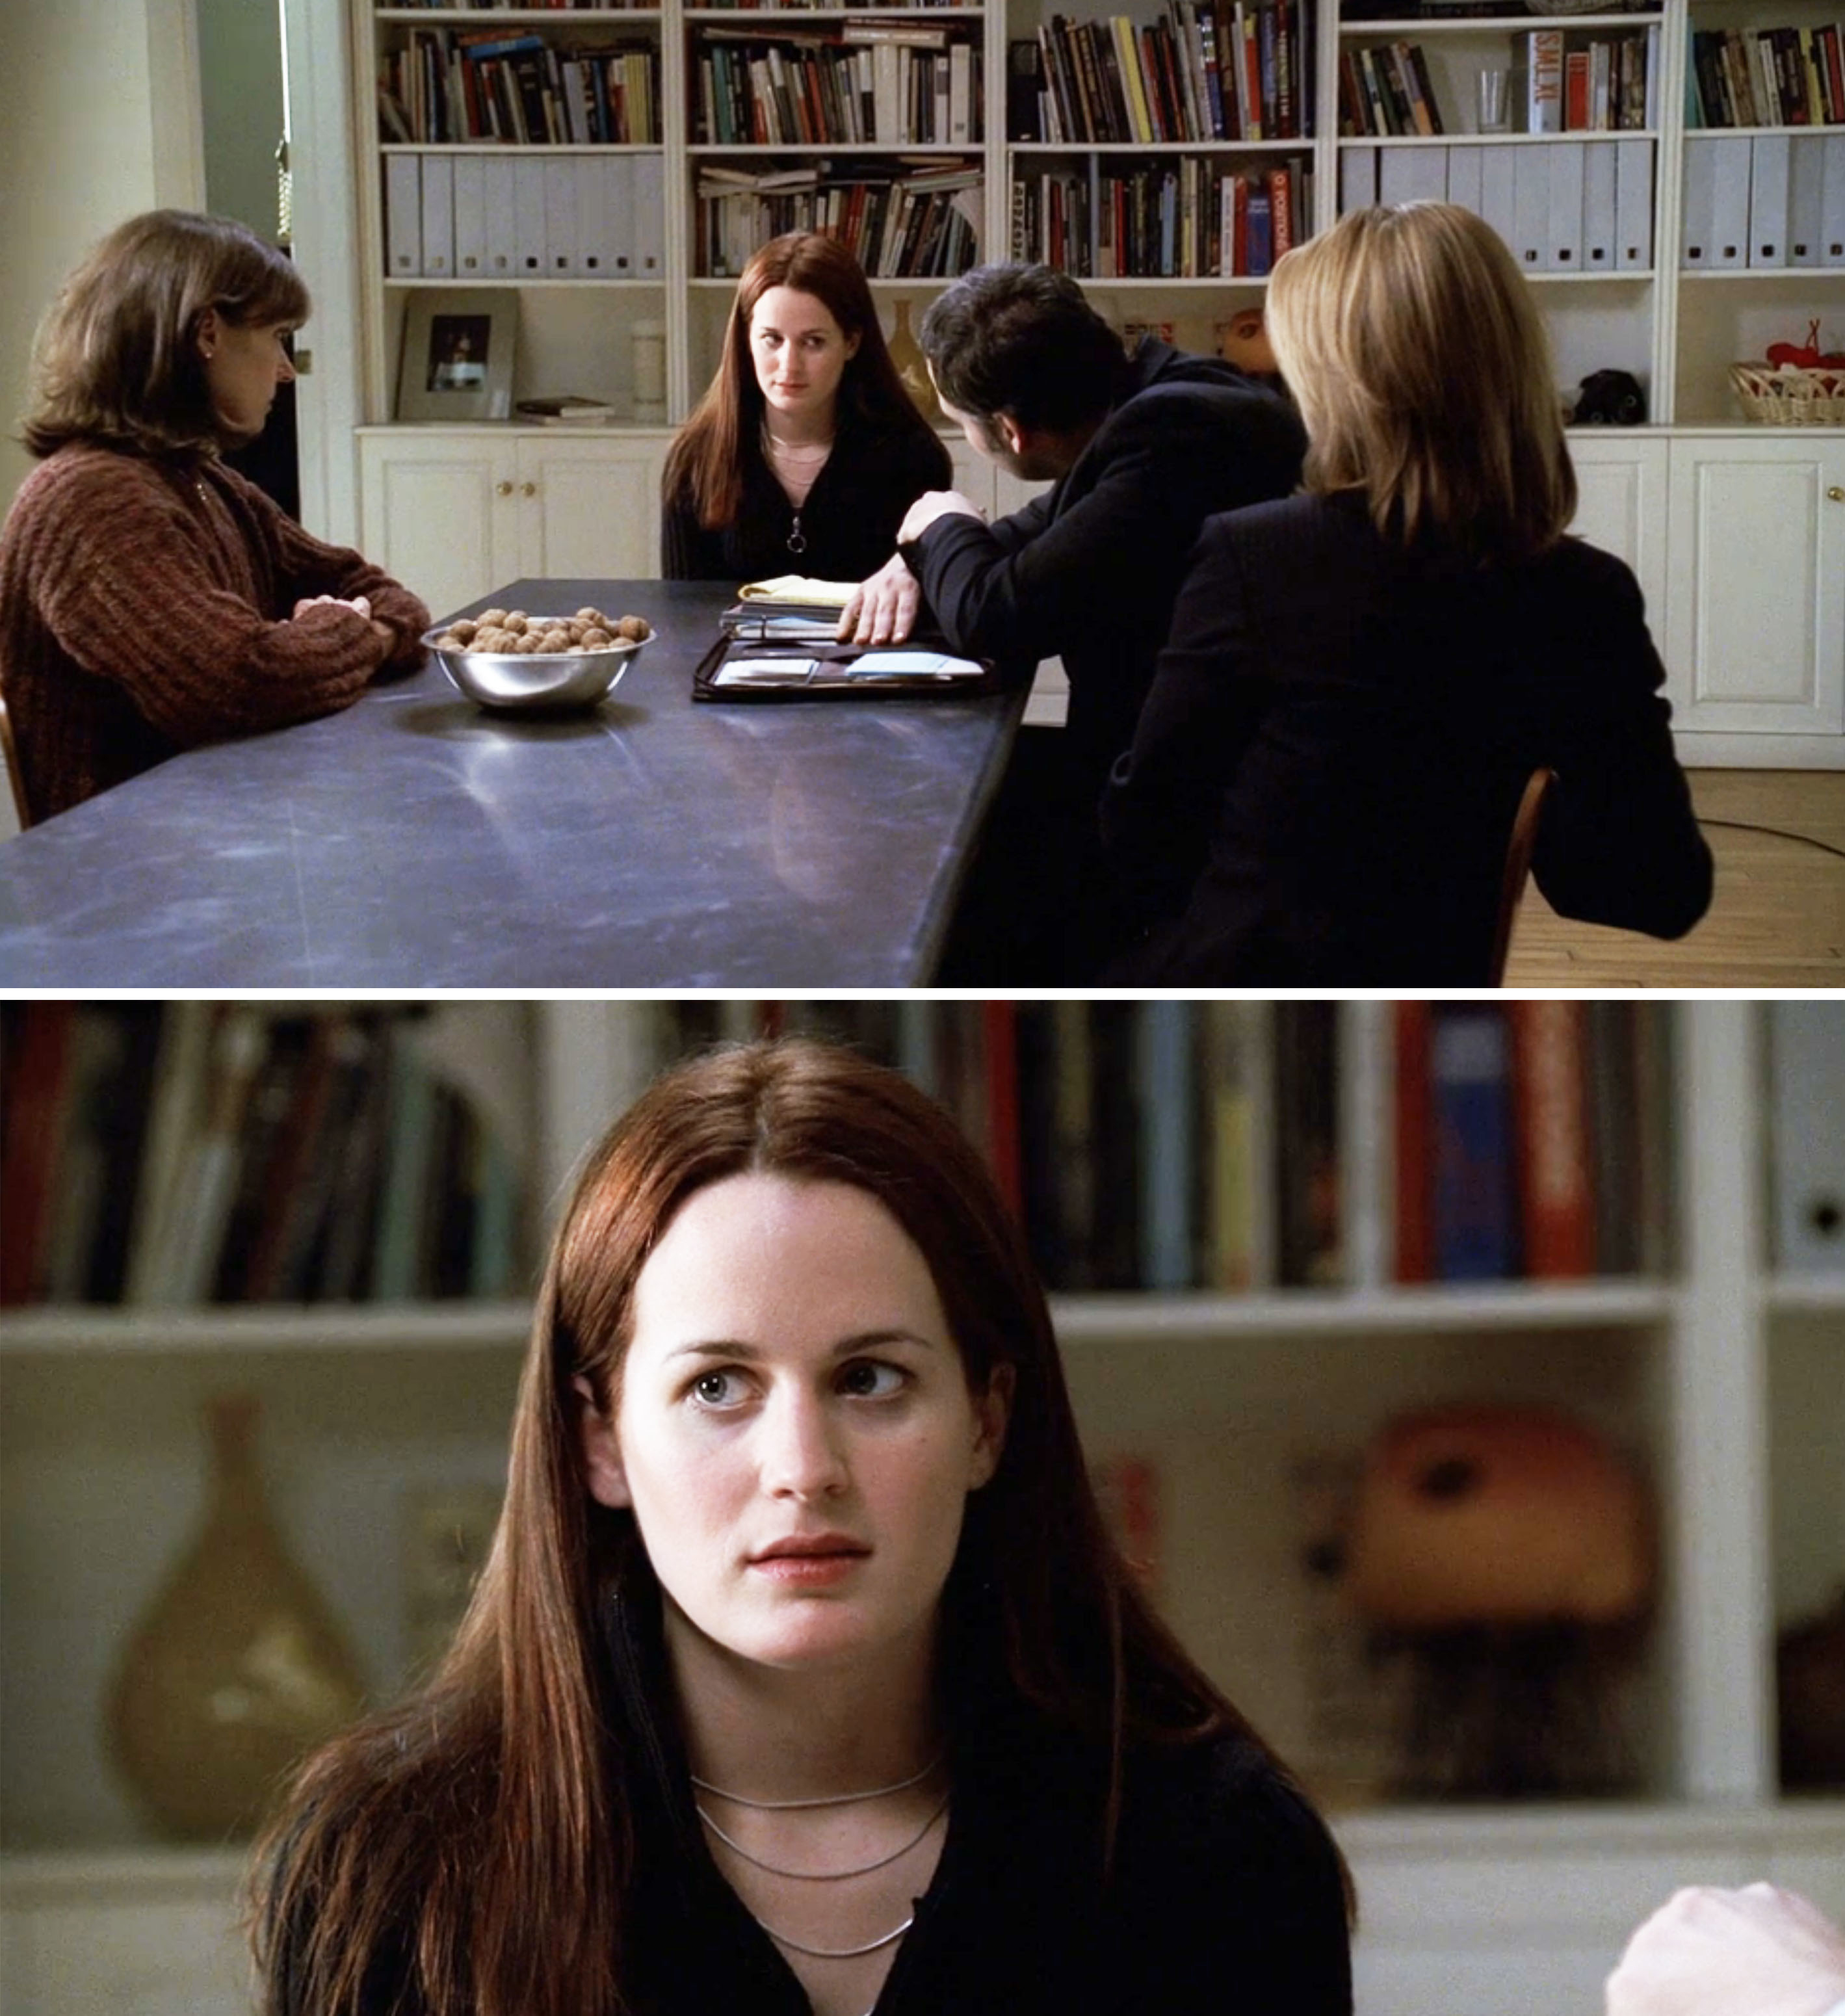 her character meeting with detectives in a kitchen